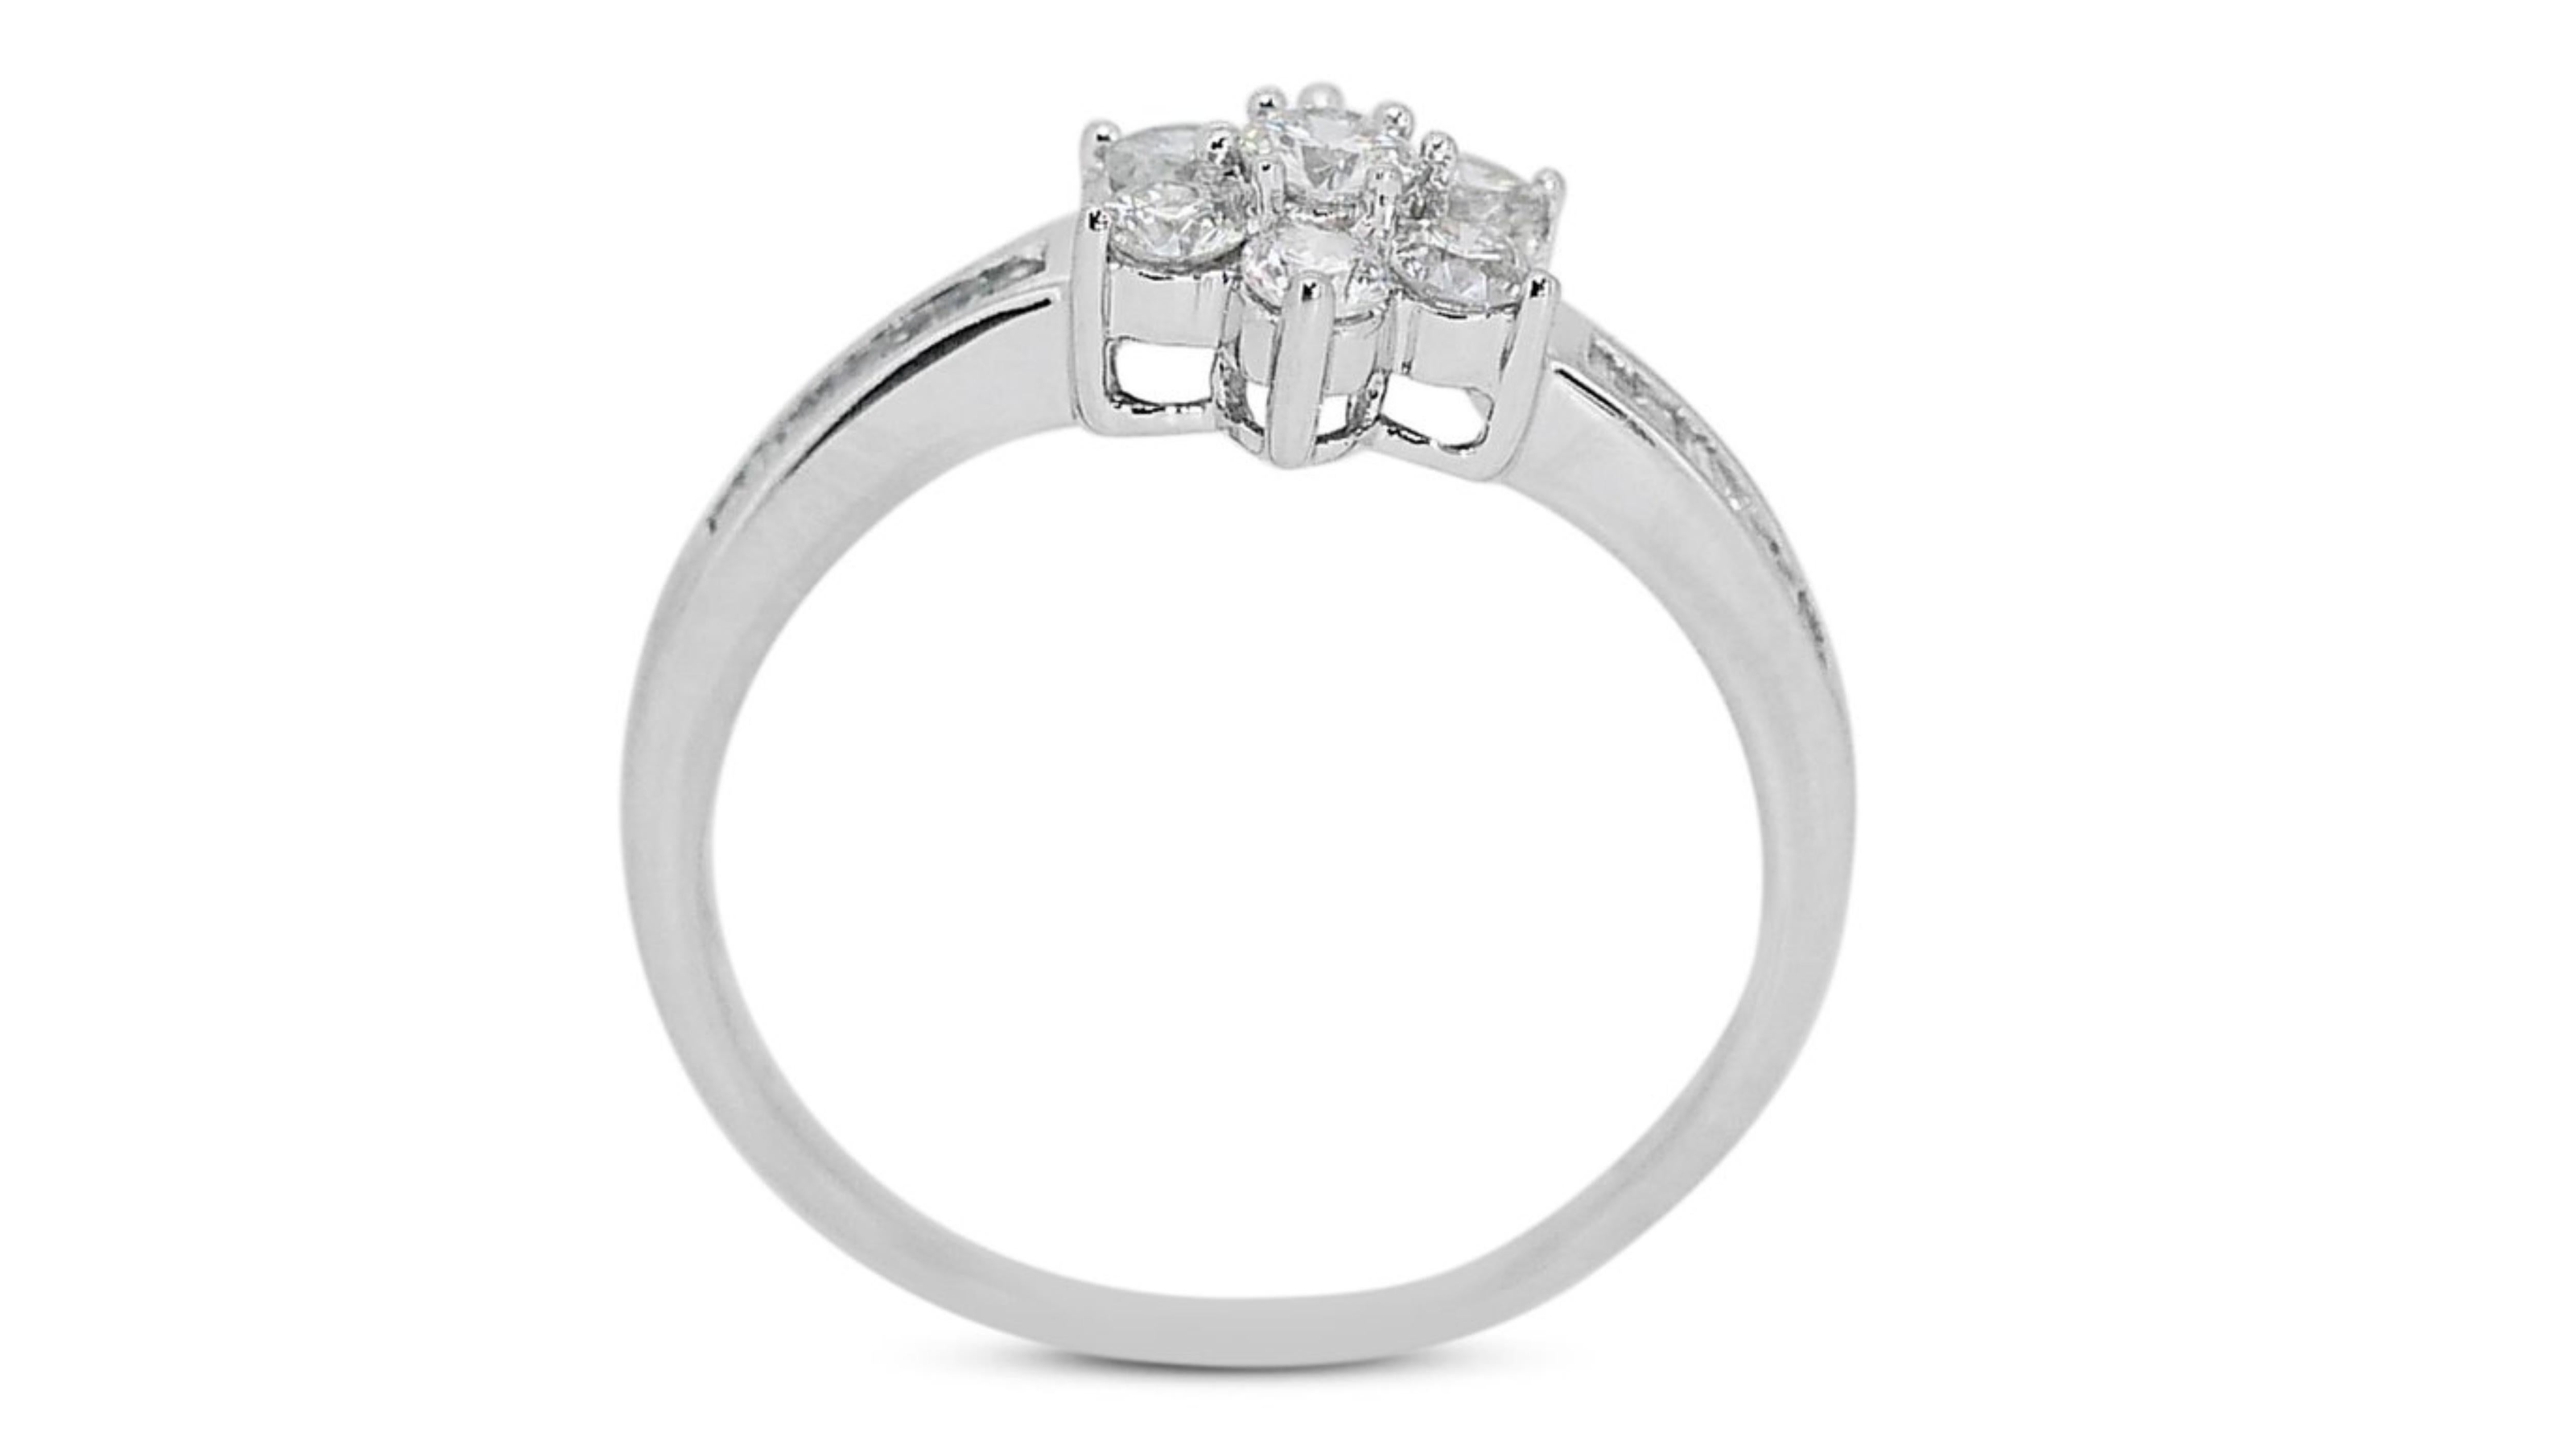 Women's or Men's Solitaire 18k White Gold Flower Ring with 2.4 carat Natural Diamond For Sale